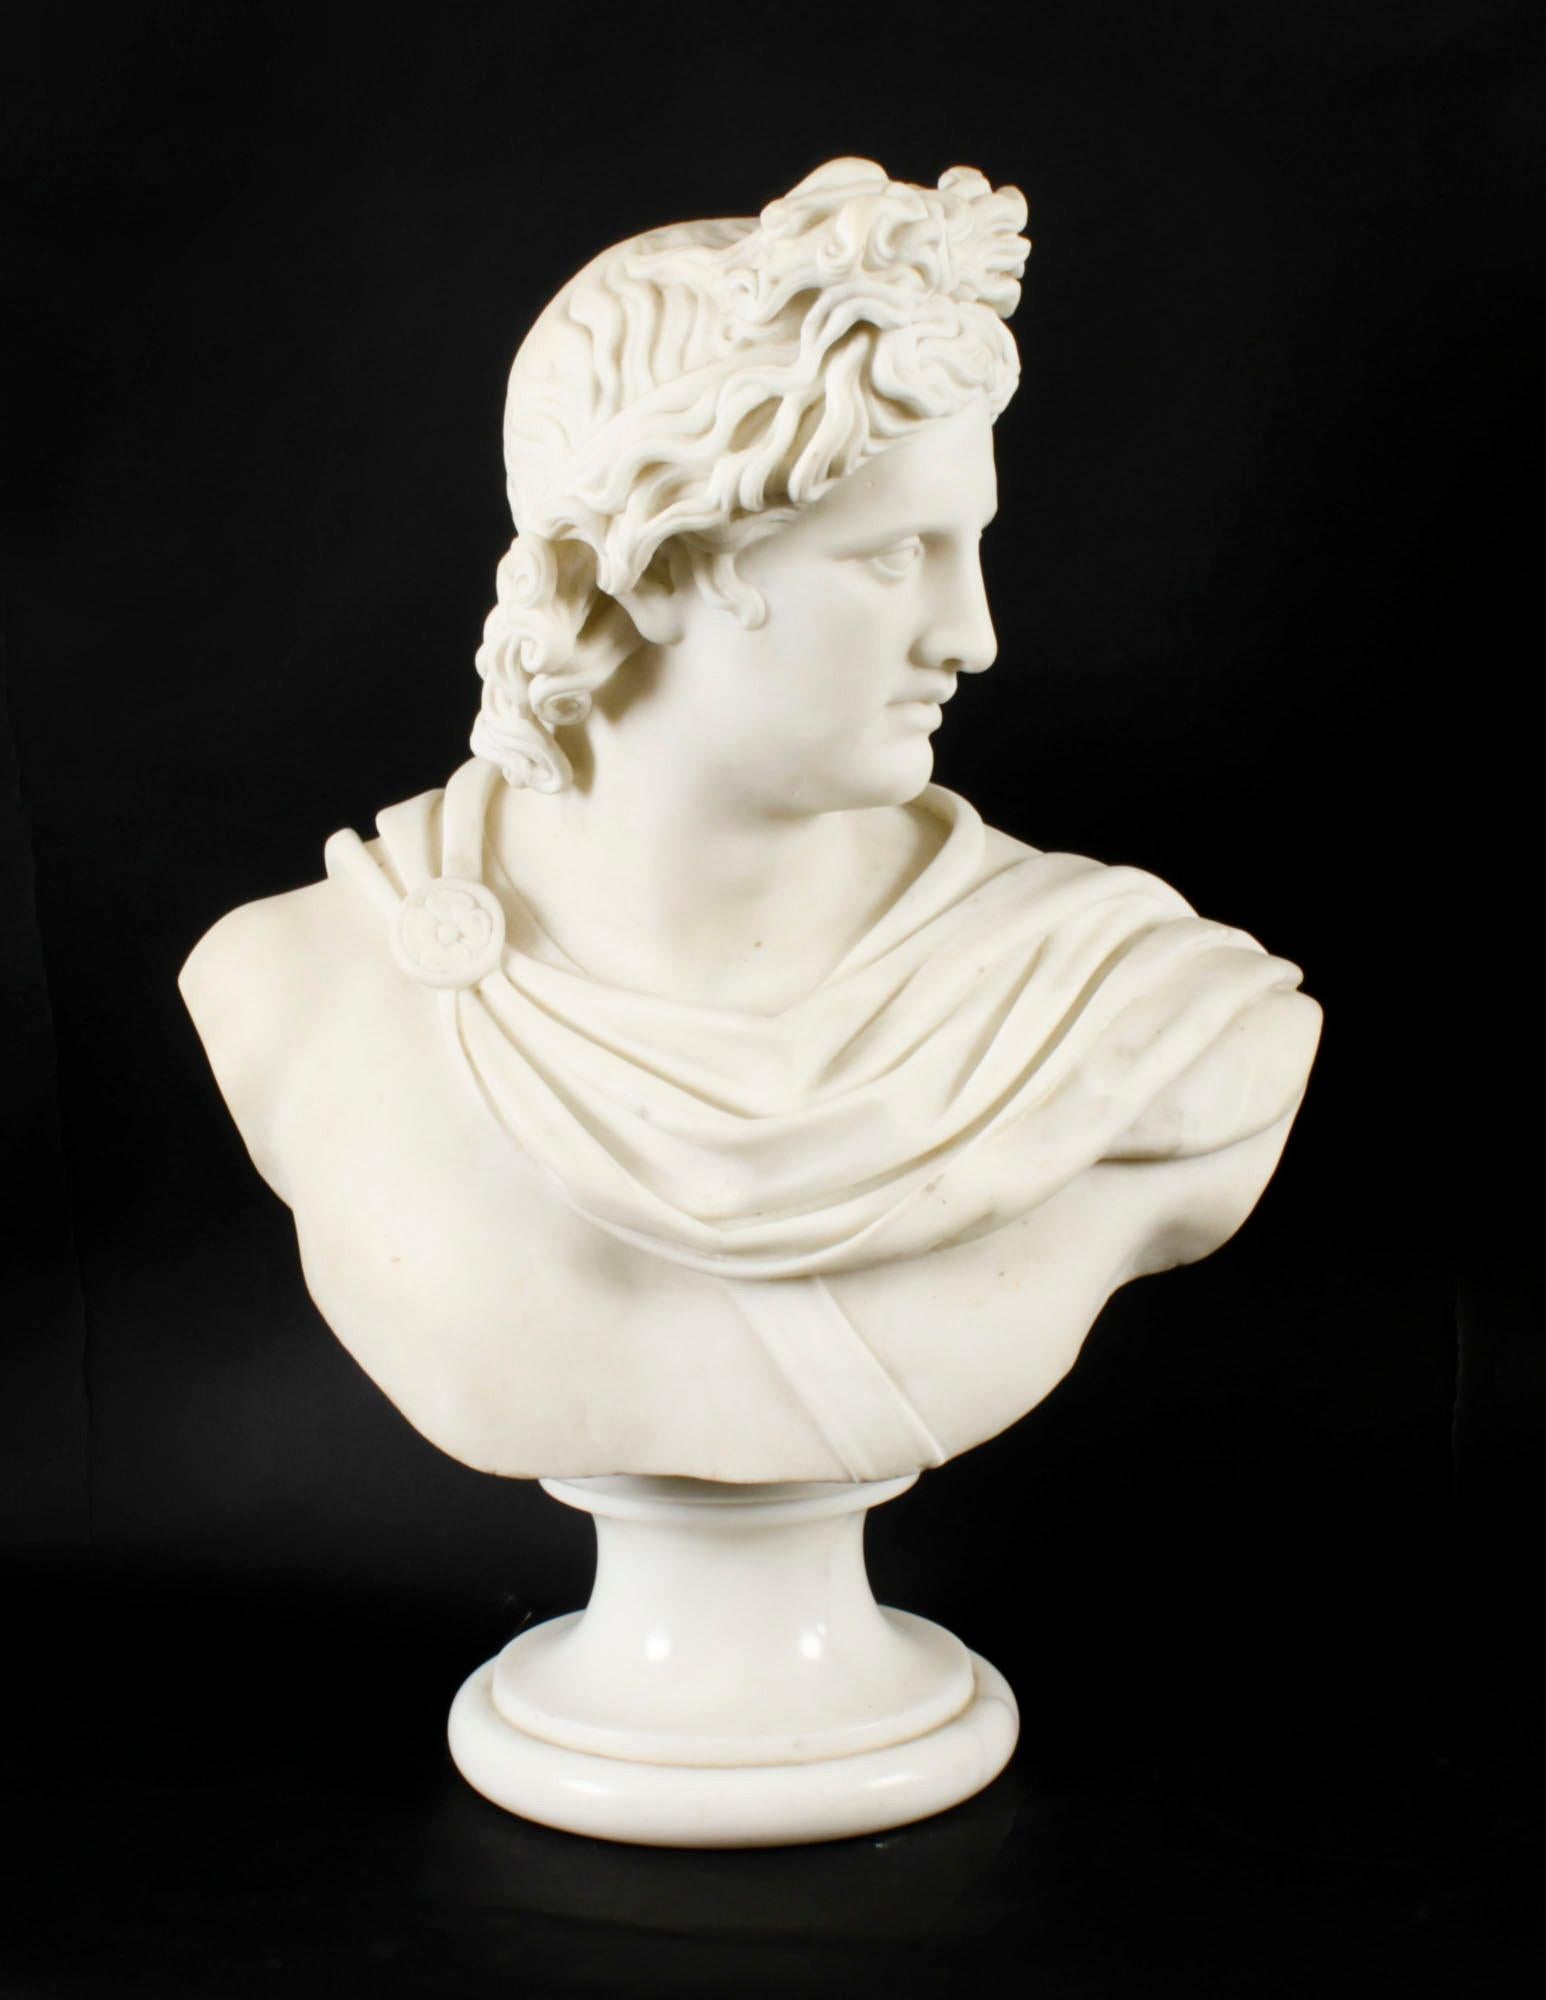 A beautifully sculpted Italian marble bust of the famous Greek god Apollo of Belvedere, on a socle stand, circa 1870 in date.

This beautifully carved Carrara marble bust was created in Italy during the 19th Century. The bust is after the 